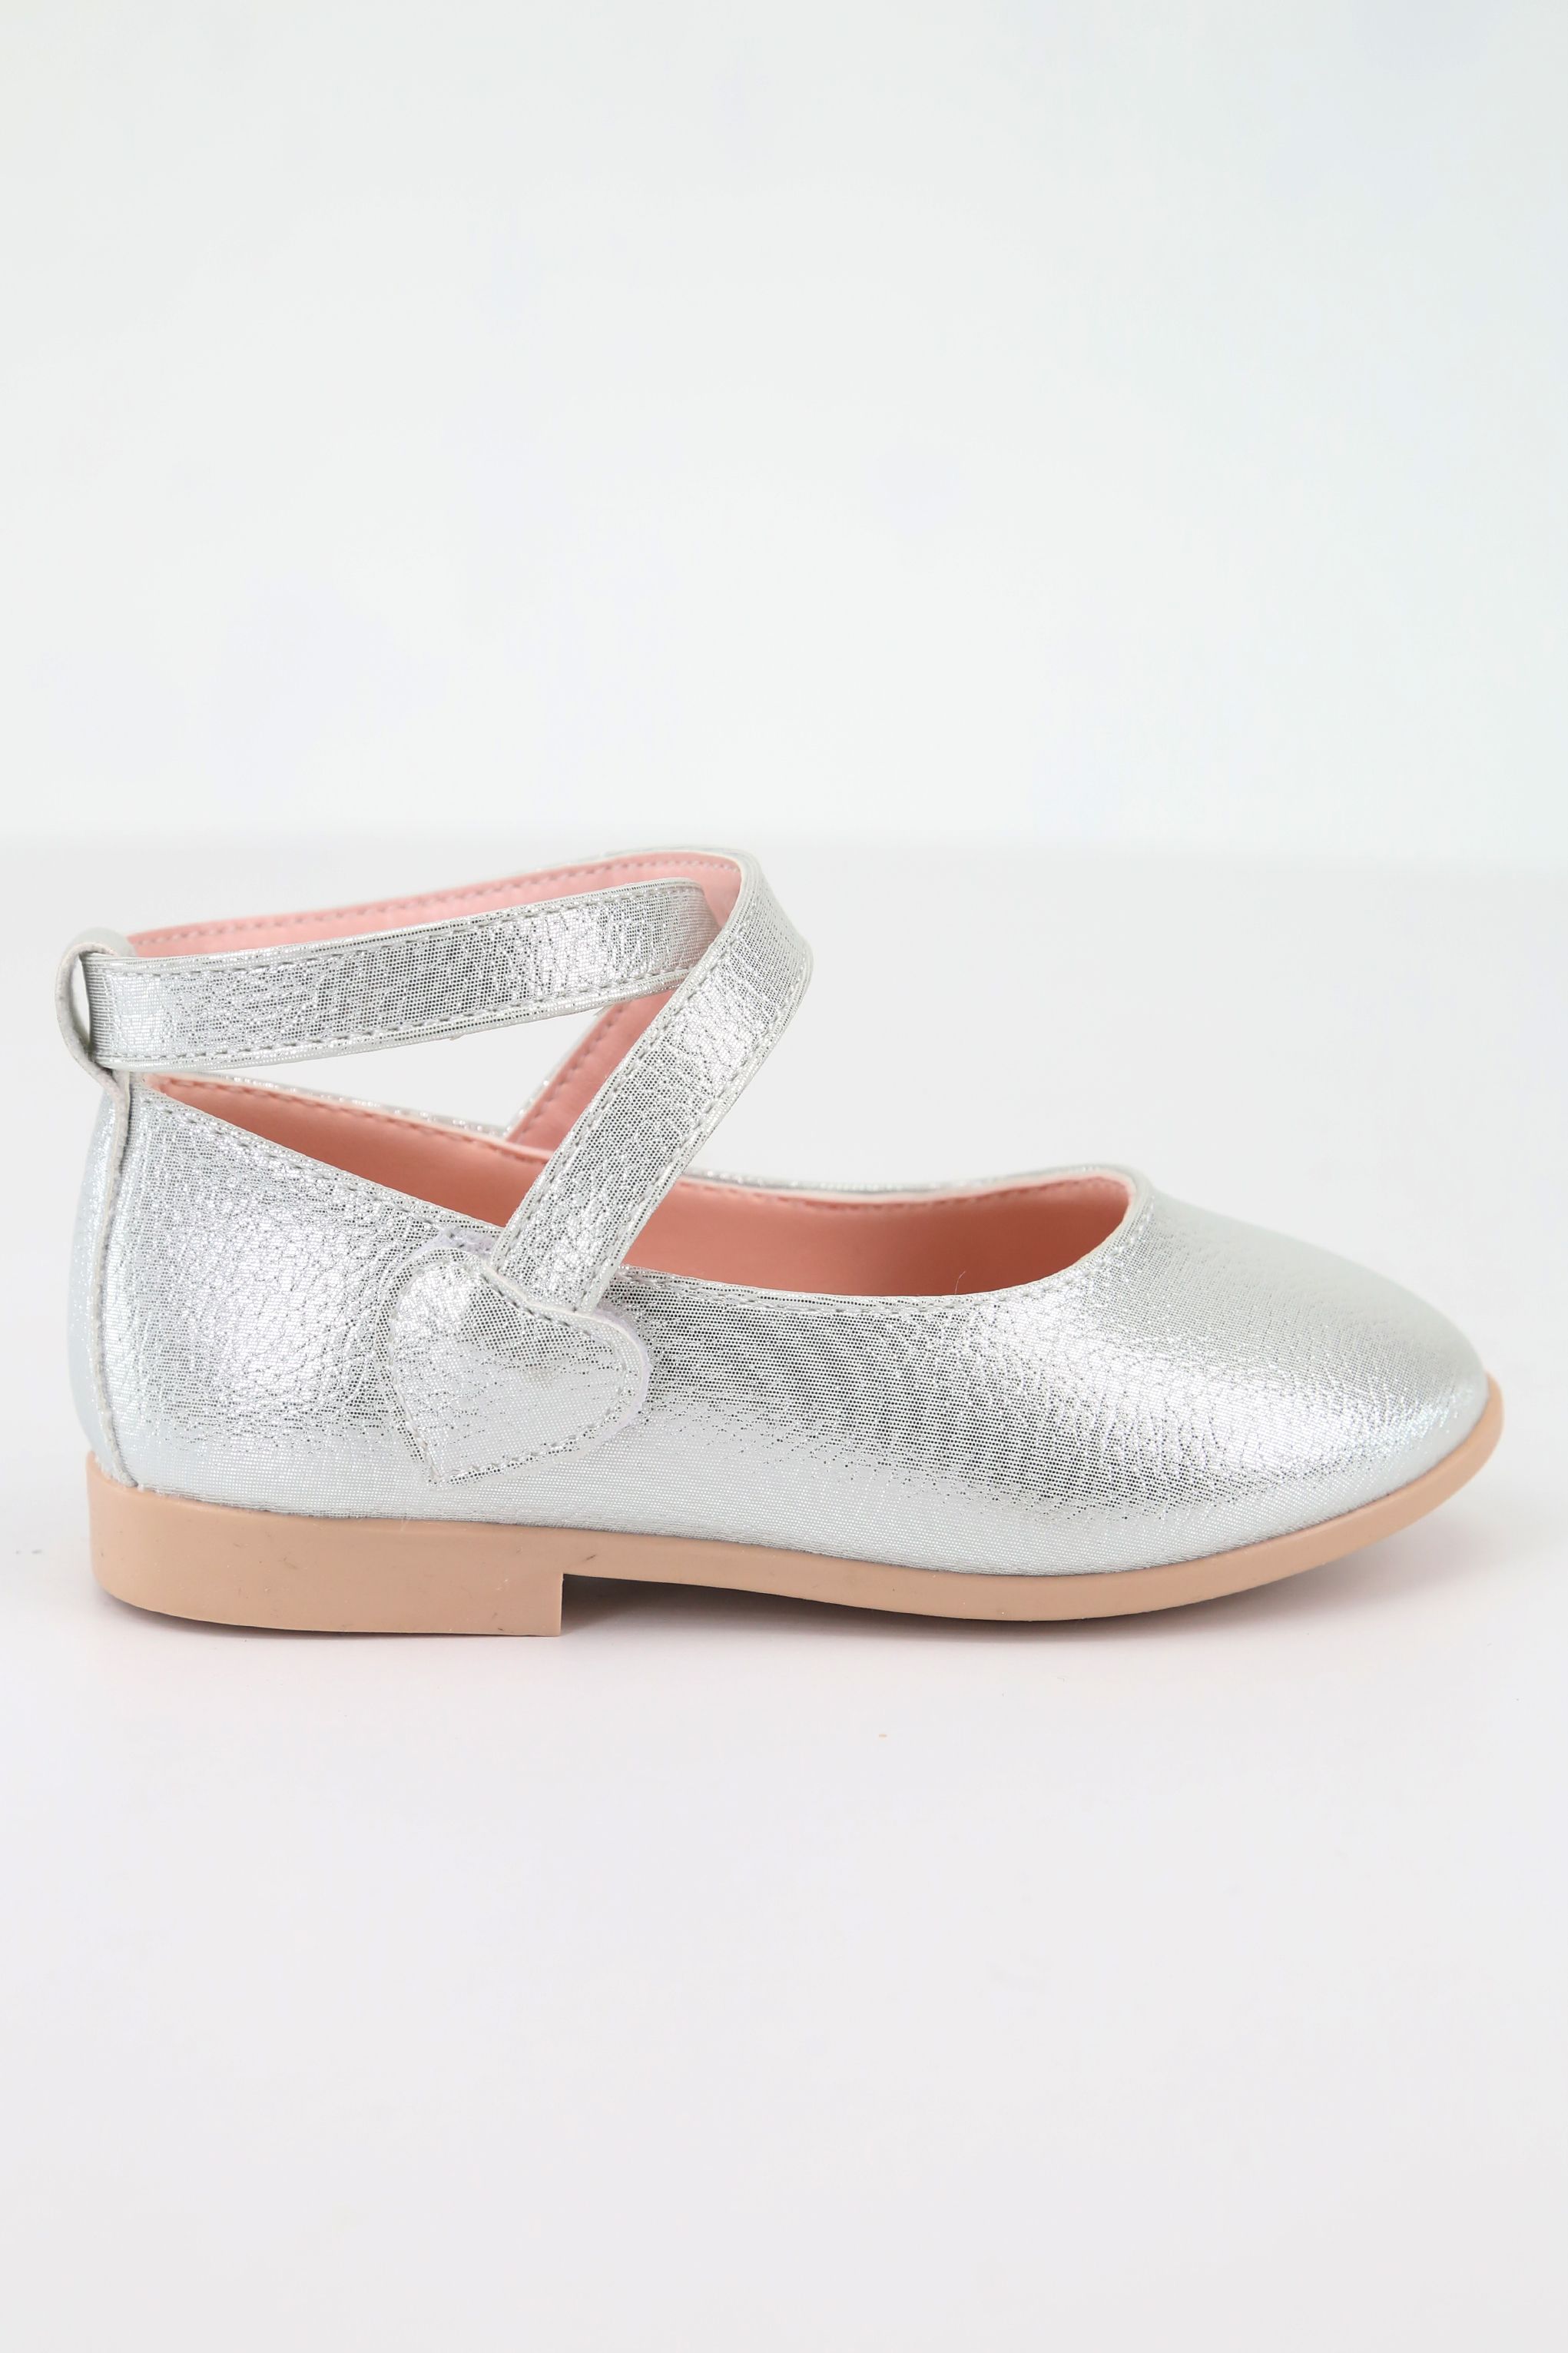 Girls' Shiny Mary Jane Flat Shoes with Criss Cross Strap - Silver